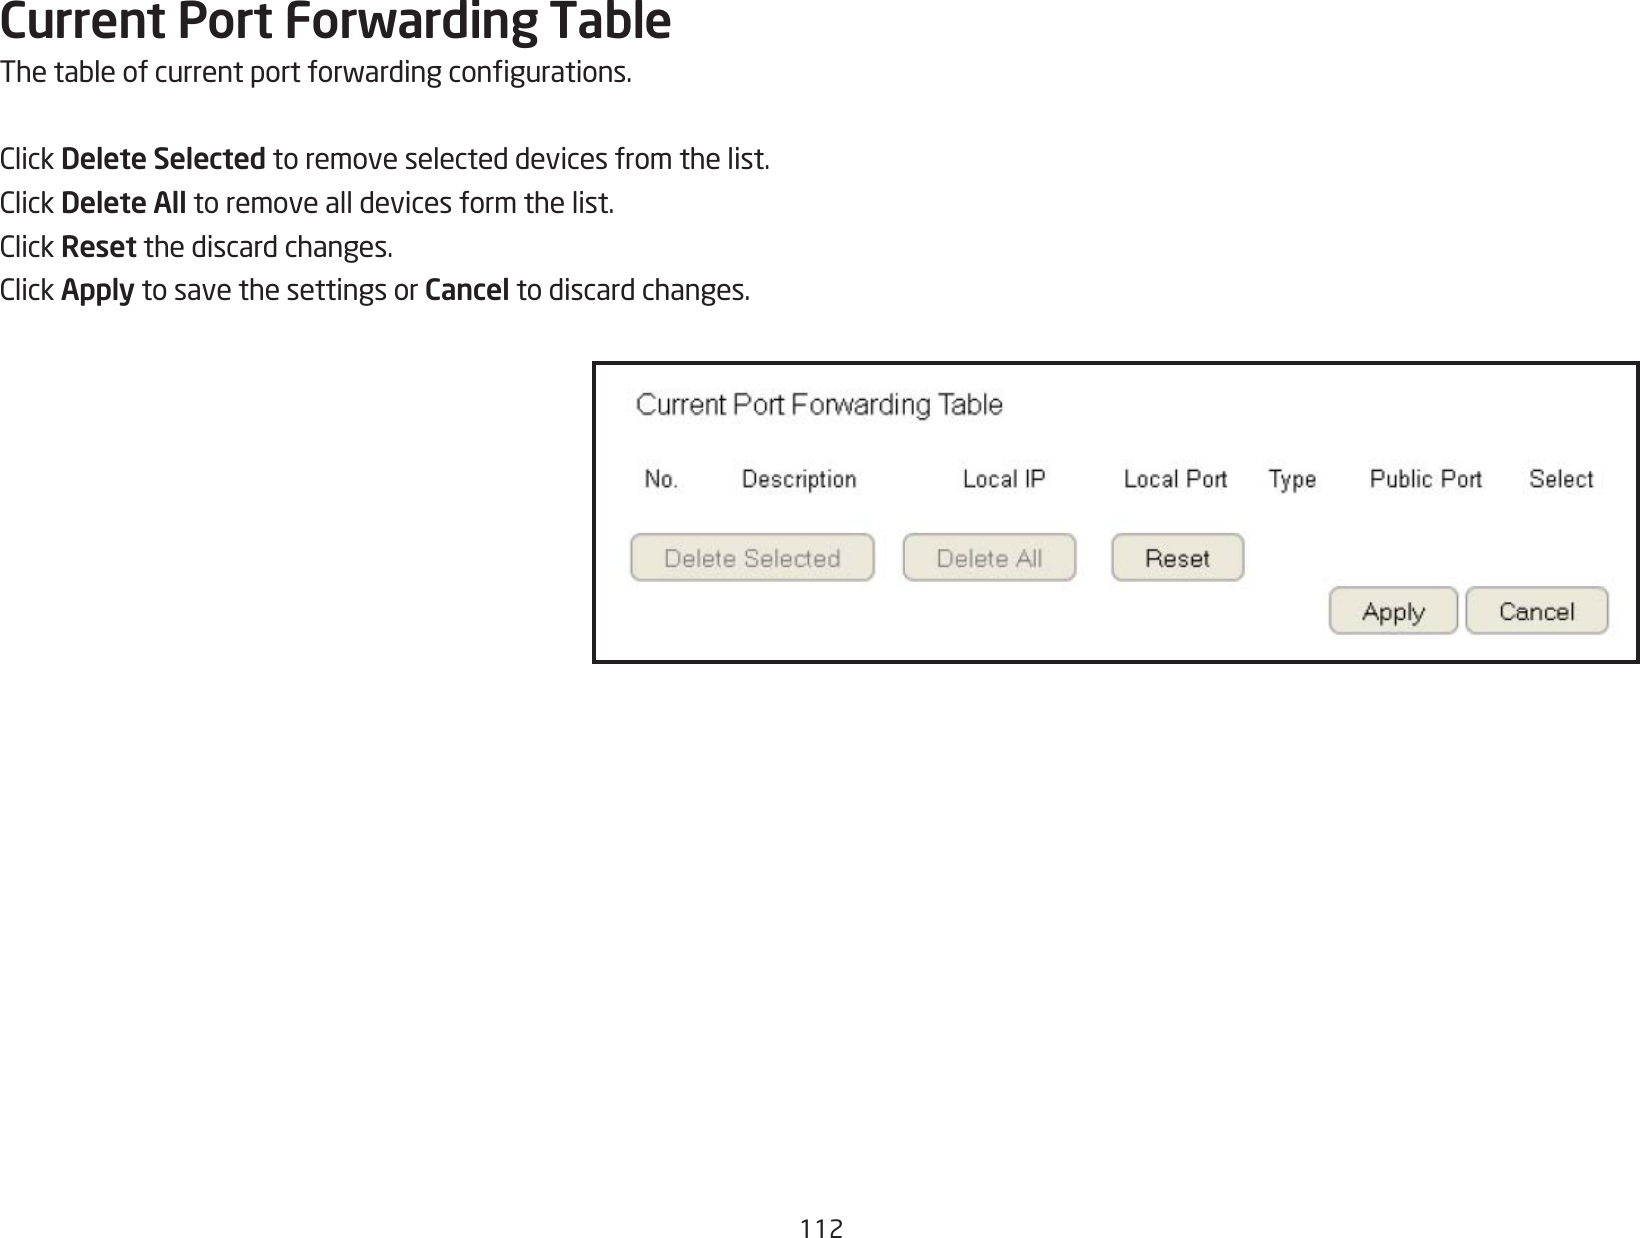 112Current Port Forwarding TableThetableofcurrentportforwardingcongurations.ClickDelete Selected to remove selected devices from the list.ClickDelete All to remove all devices form the list.ClickReset the discard changes.ClickApply to save the settings or Cancel to discard changes.